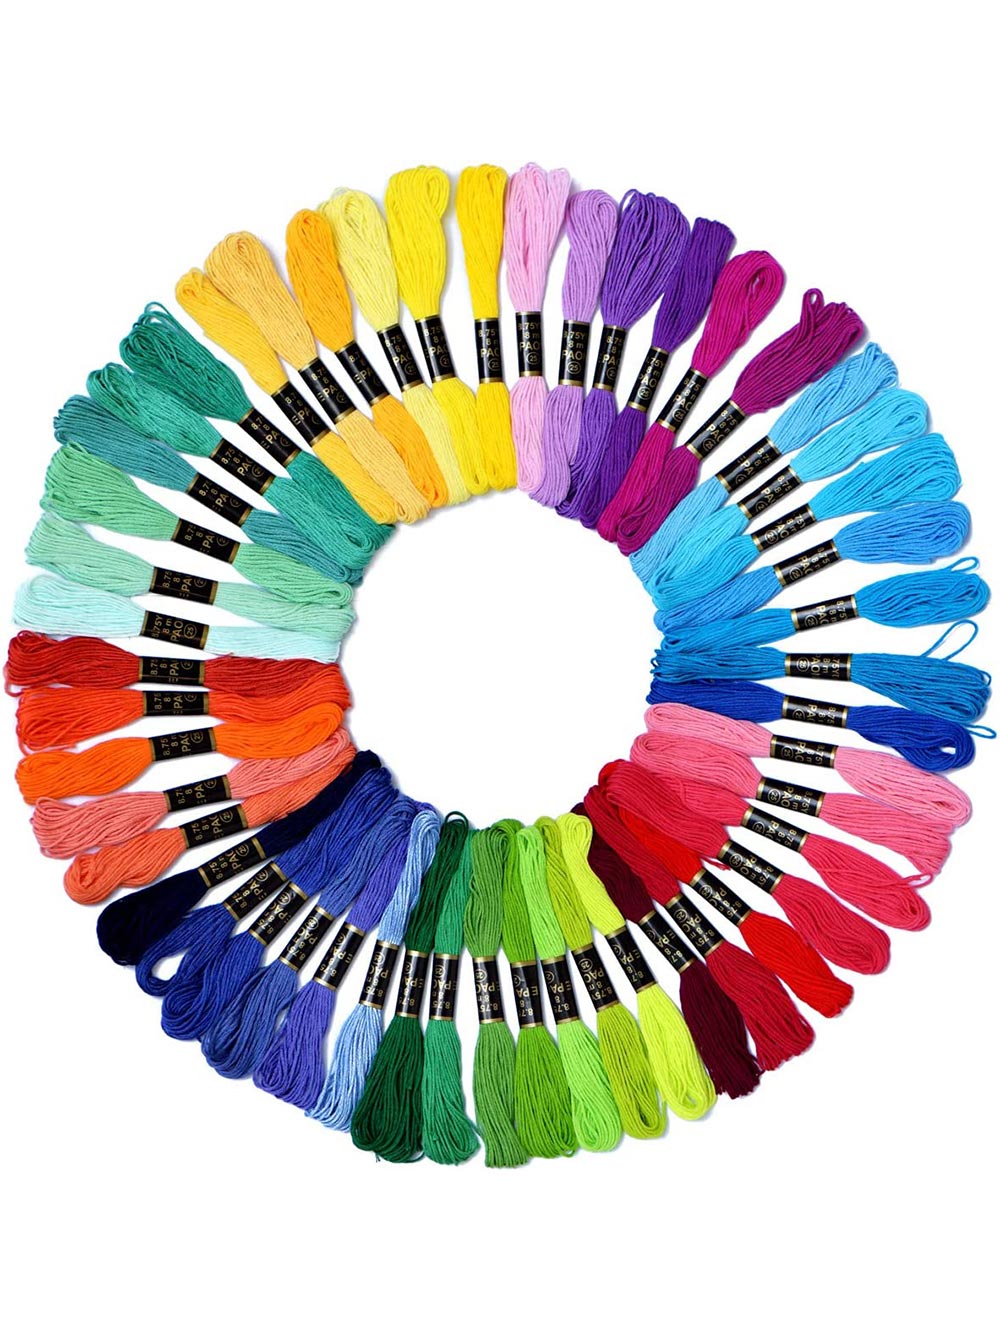 Embroidery Floss Rainbow Color 50 Skeins Per Pack